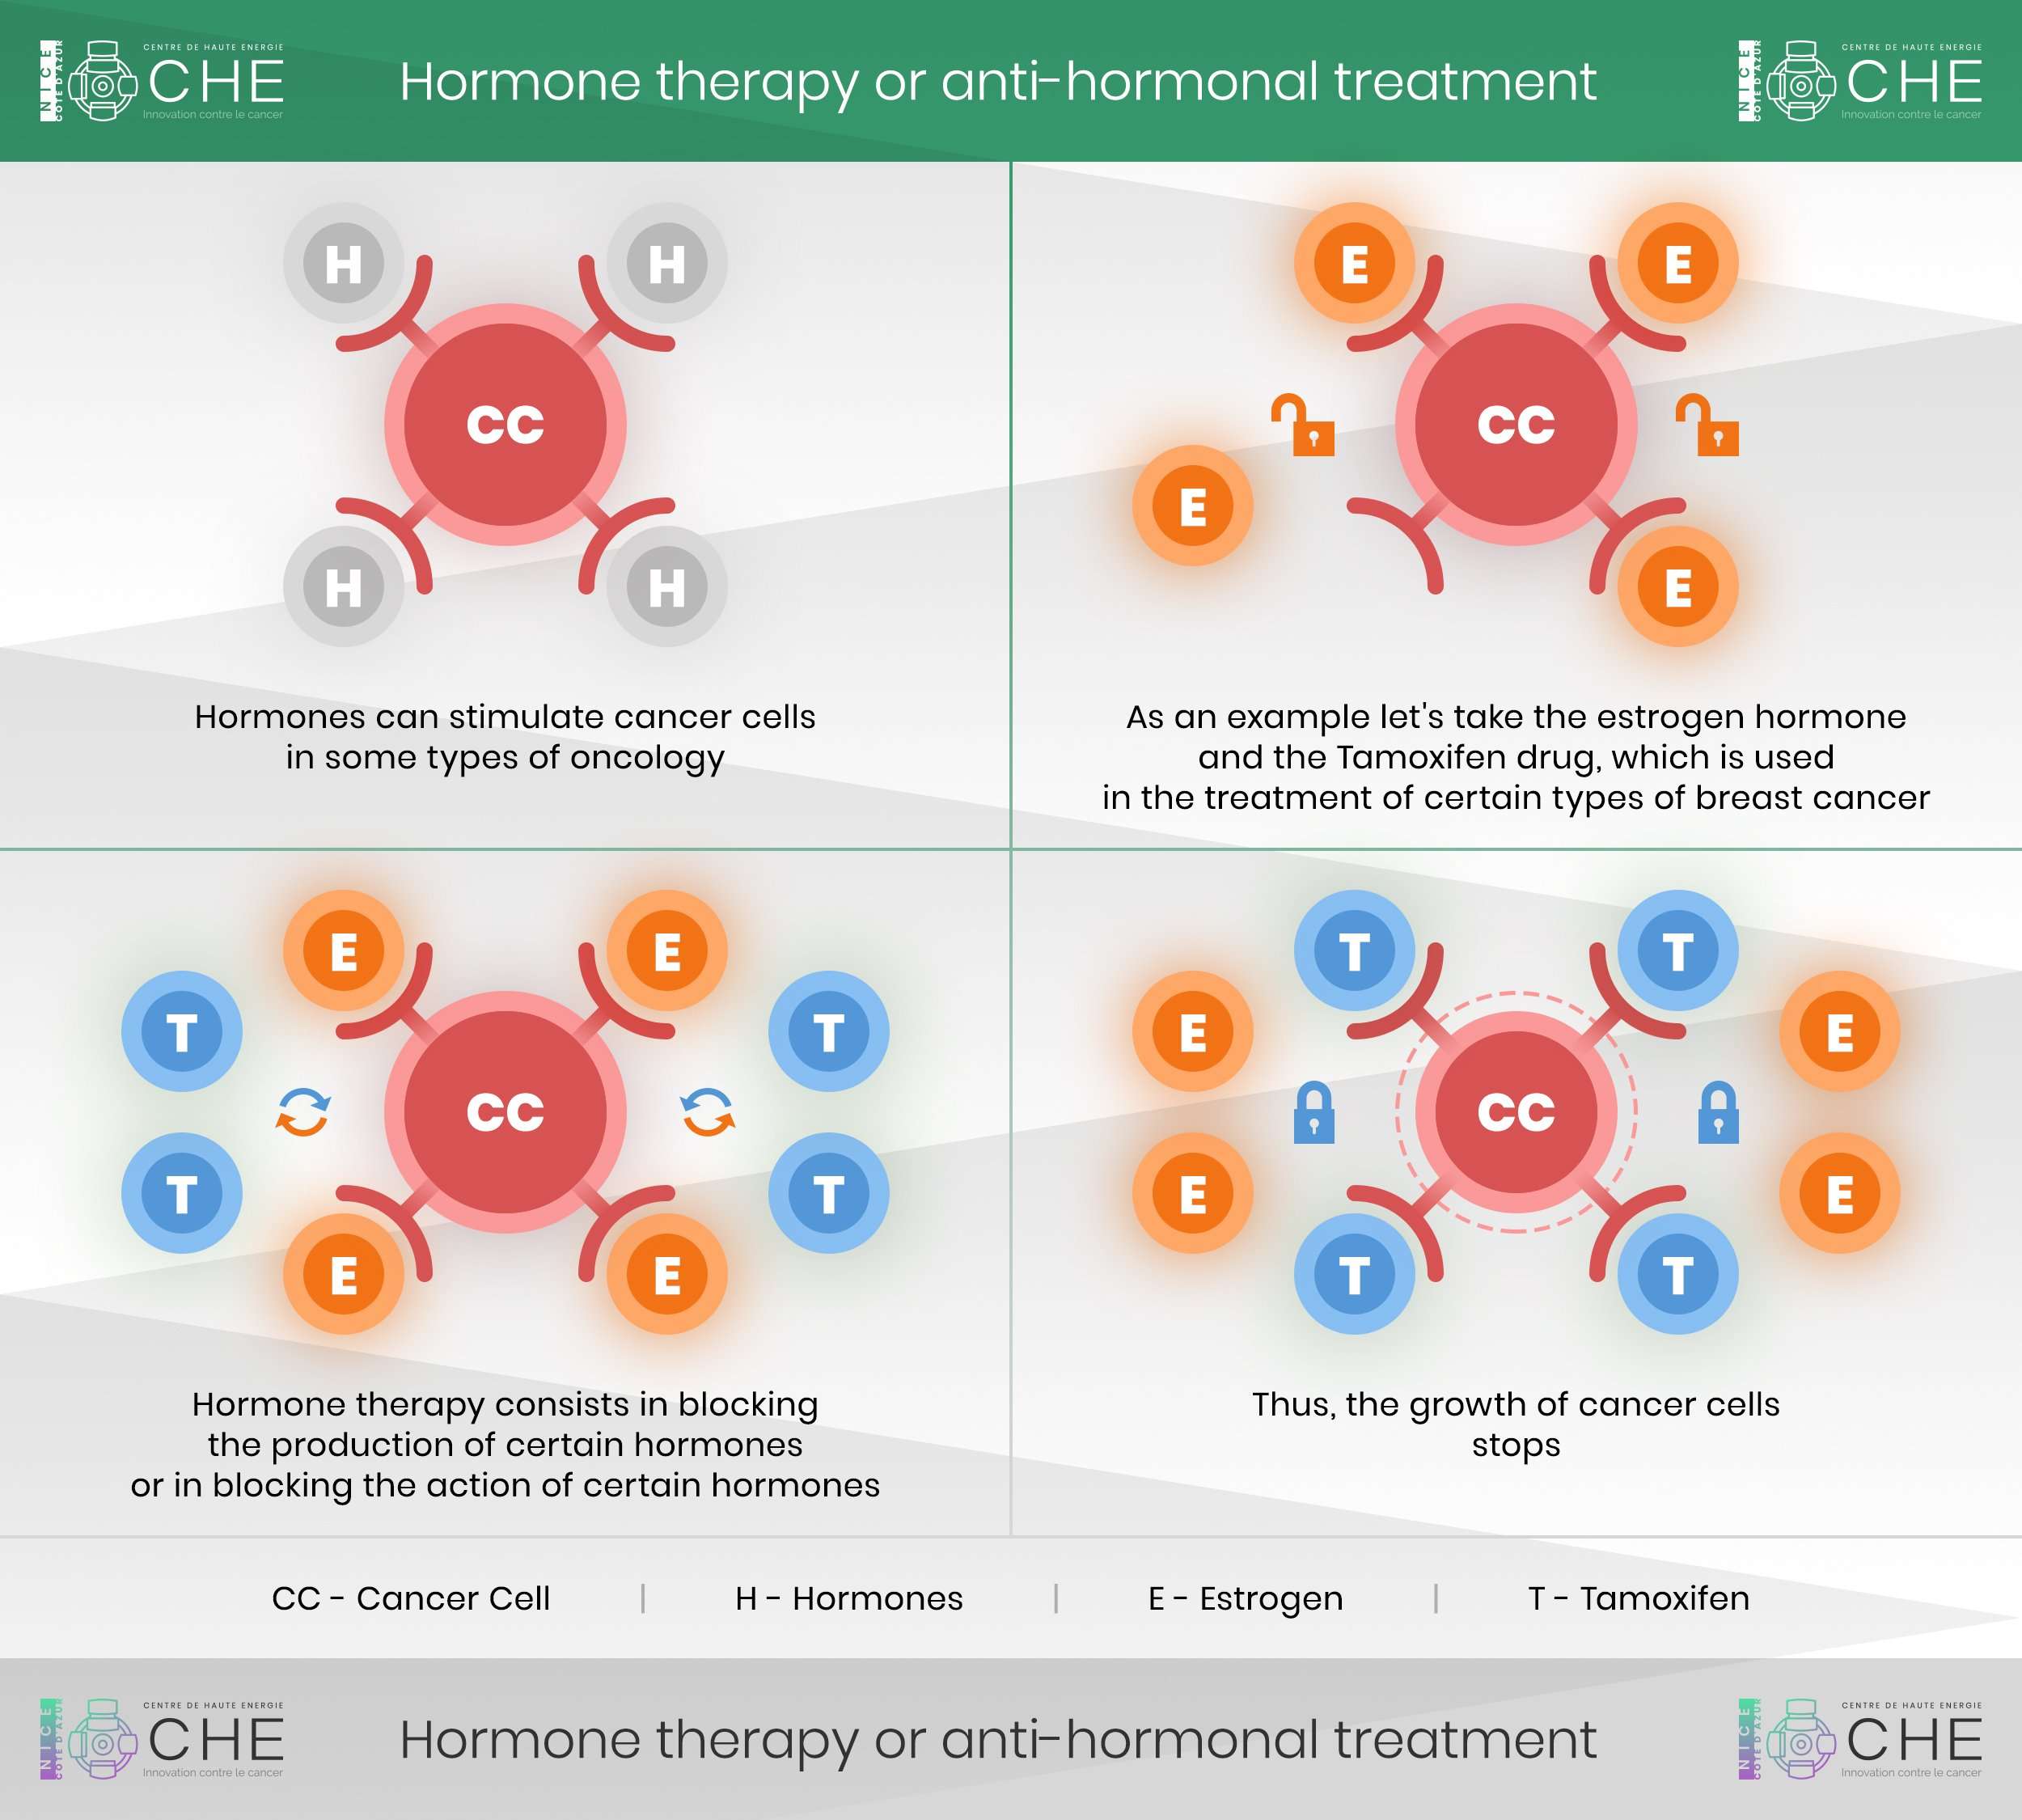 How does hormone therapy work?